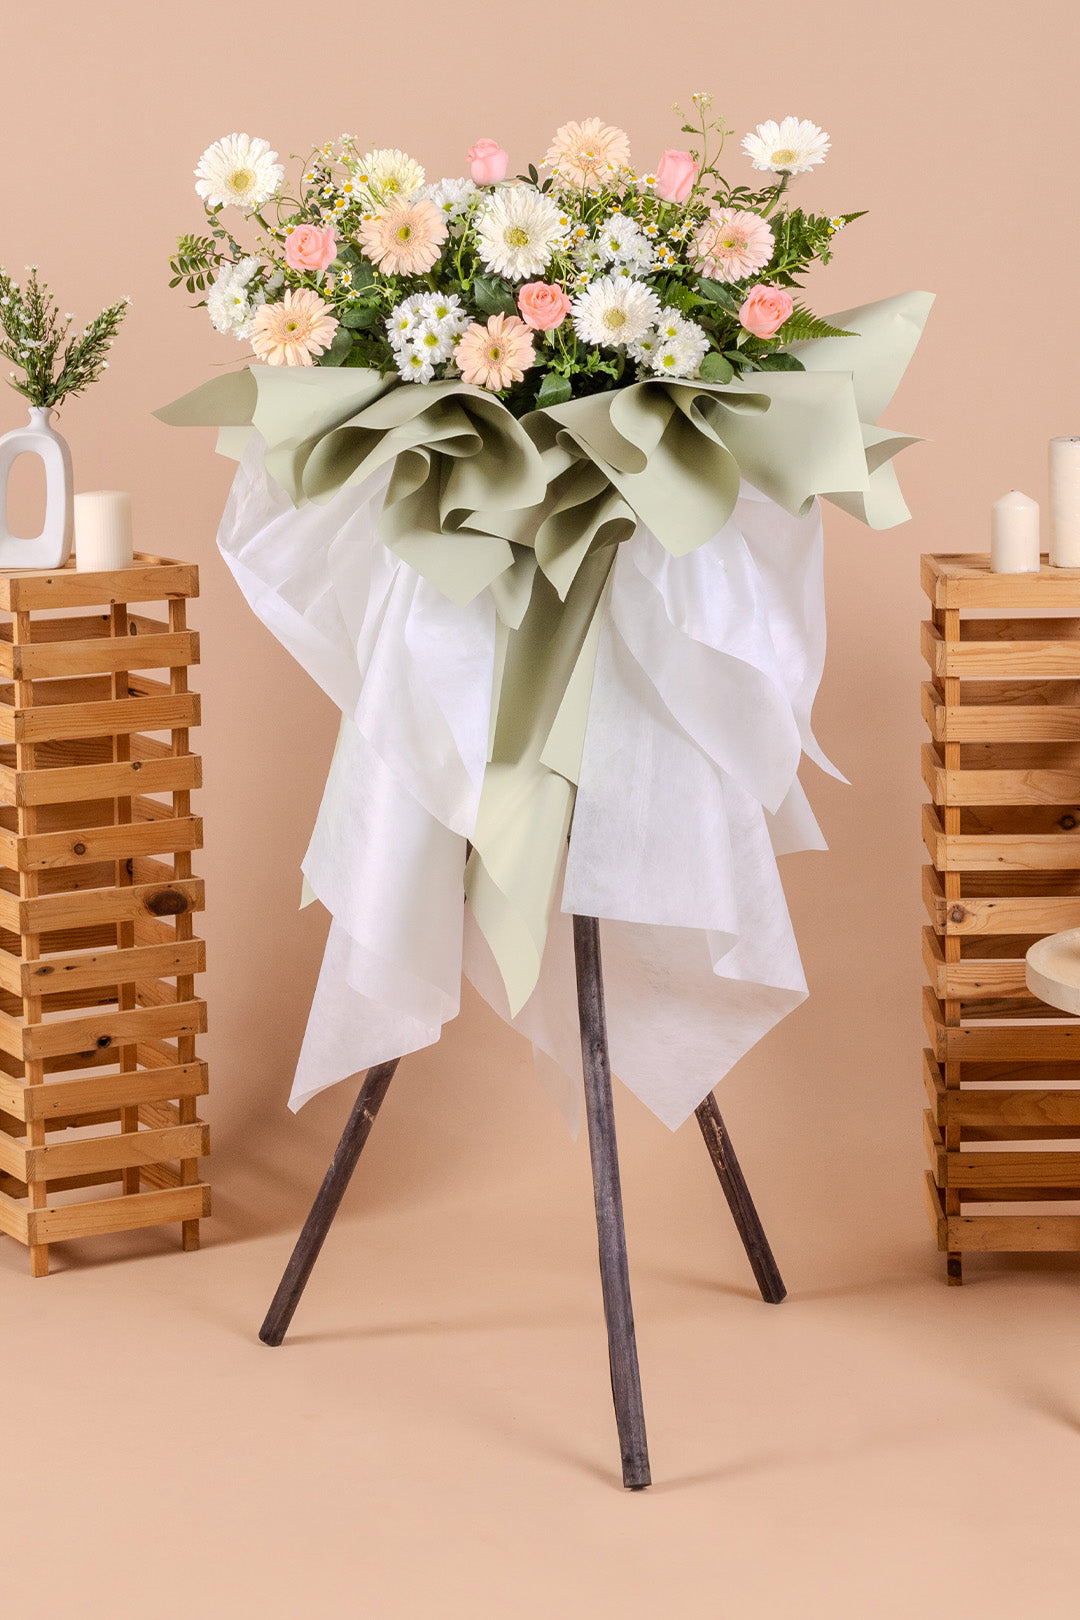 Serenity Condolence & Funeral Flower Stand